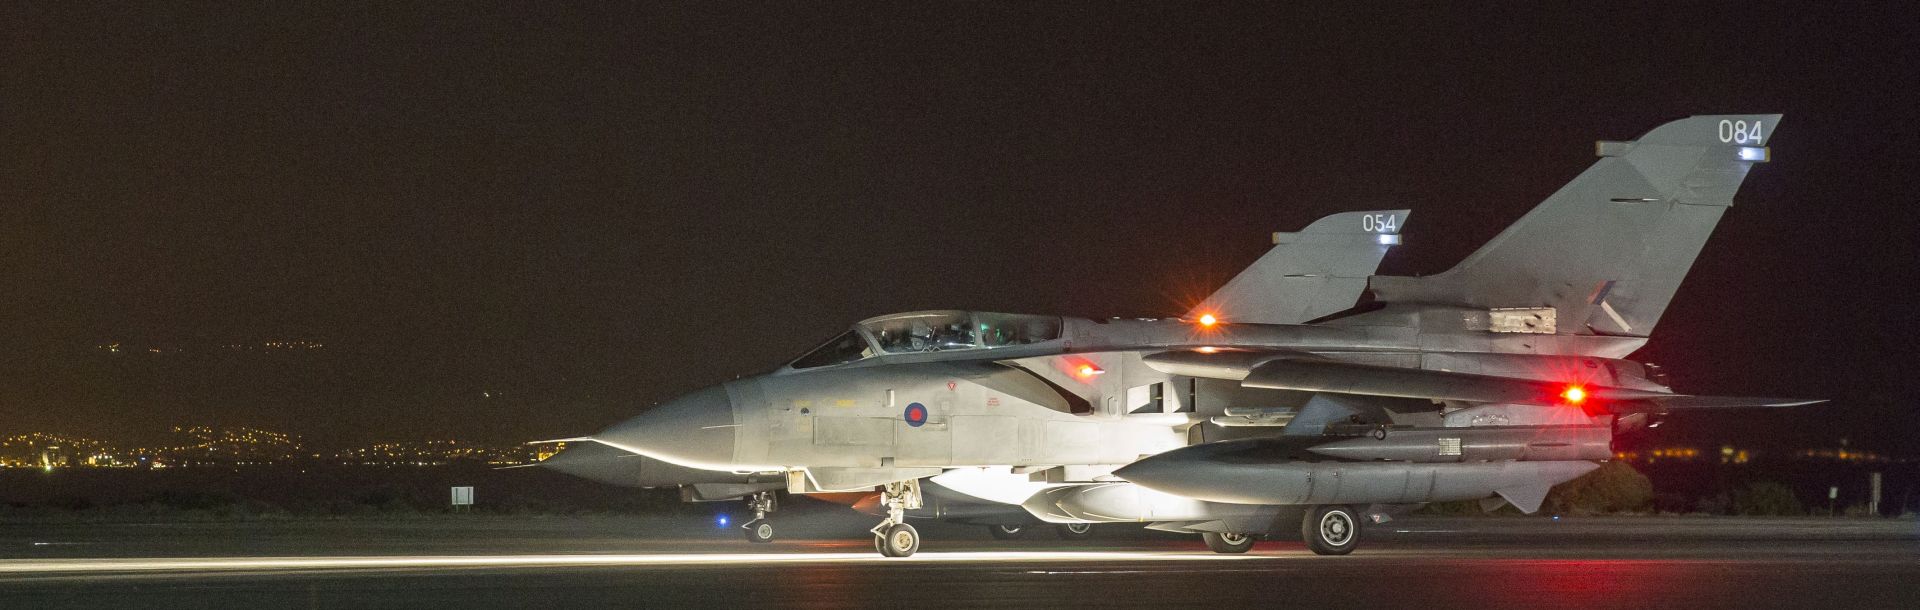 epa06667963 A handout photo made available by the British Ministry of Defence (MoD) showing two British Royal Air Force (RAF) Tornado taxing before take off at RAF Akrotiri, Cyprus, 14 April 2018 after conducting strikes in support of Operations over the Middle East.The MoD report that four RAF Tornado's took off on 14 April 2018 from RAF Akrotiri to conduct precision strikes on Syrian installations involved in the use of chemical weapons. The Tornados, flown by 31 Squadron the Goldstars, were supported by a Voyager aircraft. They launched Storm Shadow missiles at a military facility – a former missile base – some fifteen miles west of Homs, where the regime is assessed to keep chemical weapon precursors stockpiled in breach of Syria’s obligations under the Chemical Weapons Convention.  Very careful scientific analysis was applied to determine where best to target the Storm Shadows to maximise the destruction of the stockpiled chemicals and to minimise any risks of contamination to the surrounding area.  The facility which was struck is located some distance from any known concentrations of civilian habitation, reducing yet further any such risk.  EPA/Cpl L MATTHEWS / BRITISH MINISTRY OF DEFENCE / HANDOUT MANDATORY CREDIT MOD: CROWN COPYRIGHT HANDOUT EDITORIAL USE ONLY/NO SALES